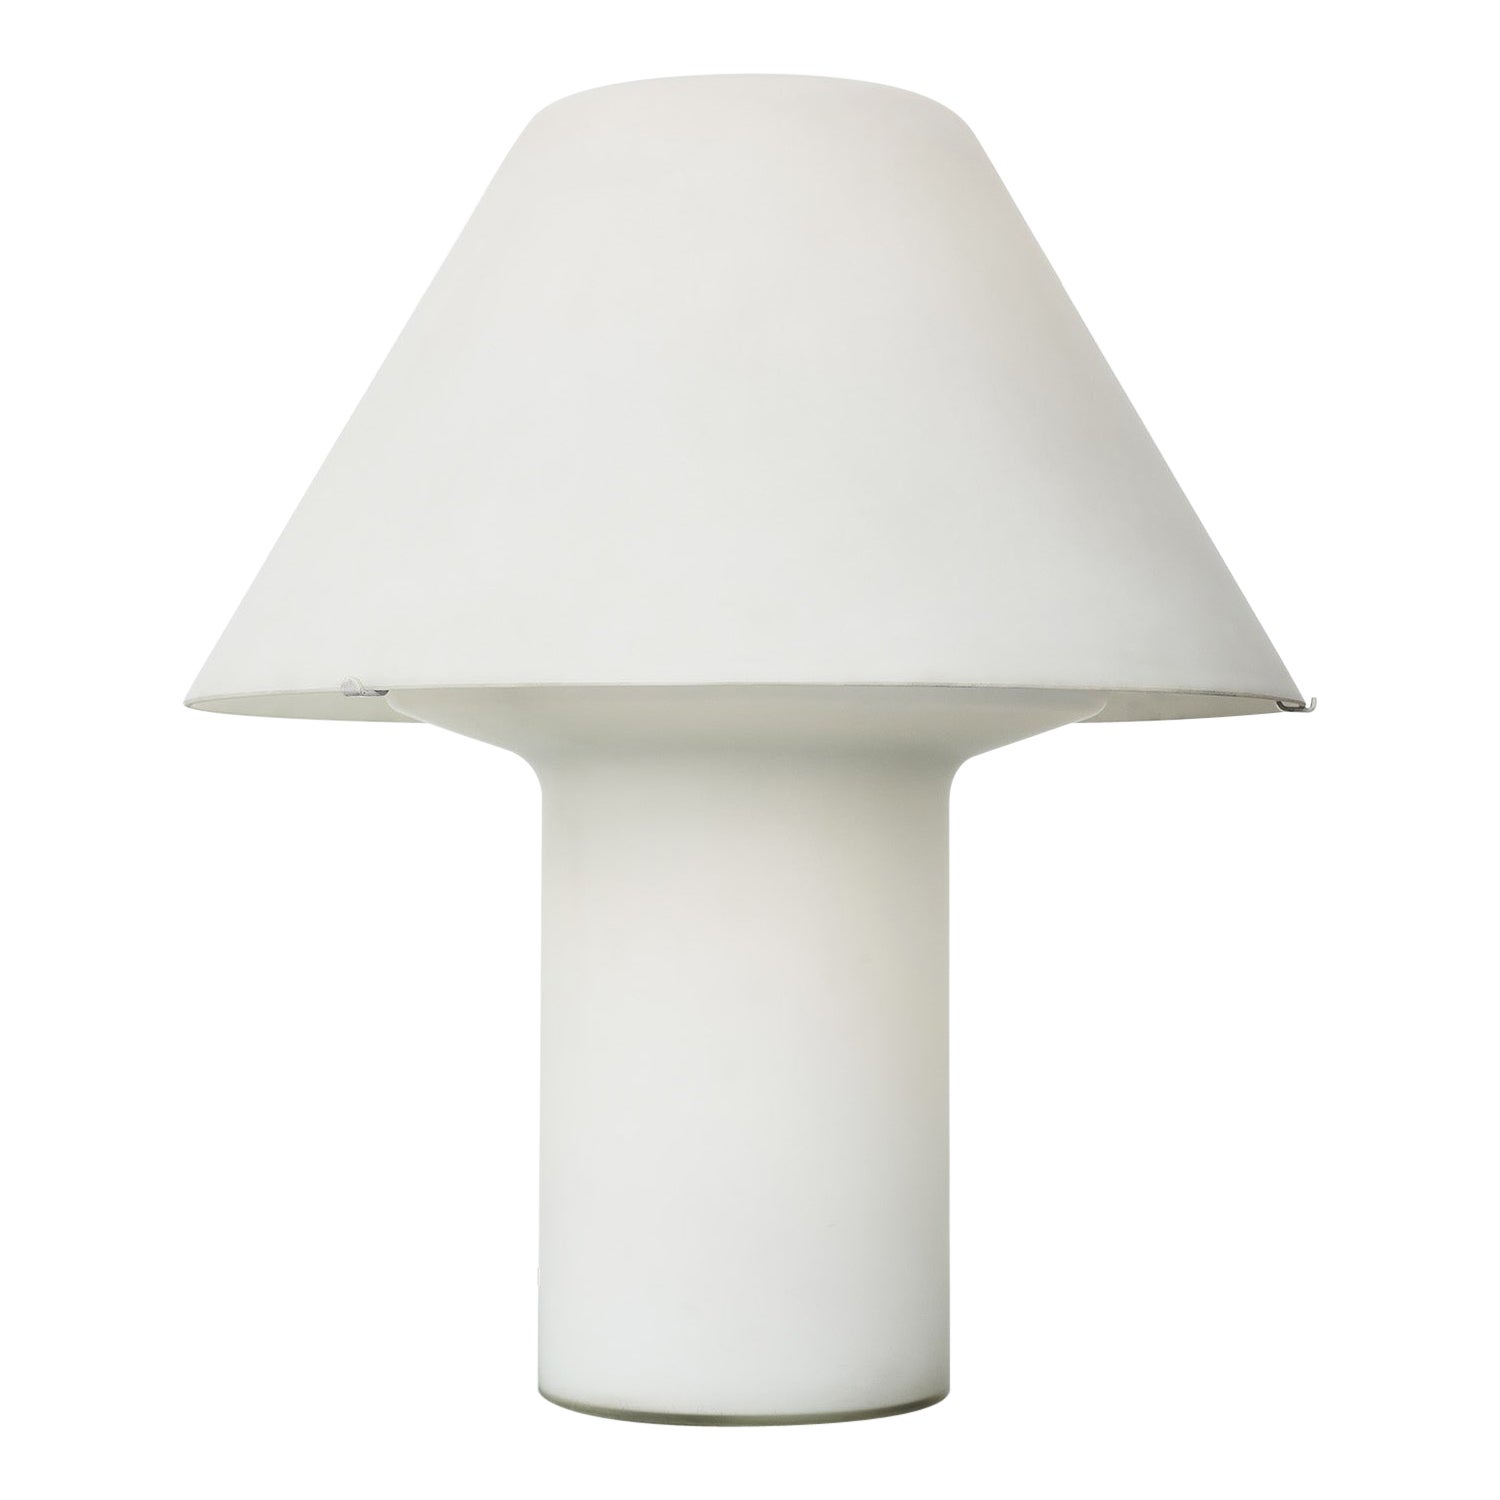 Frosted opal glass mushroom table lamp For Sale